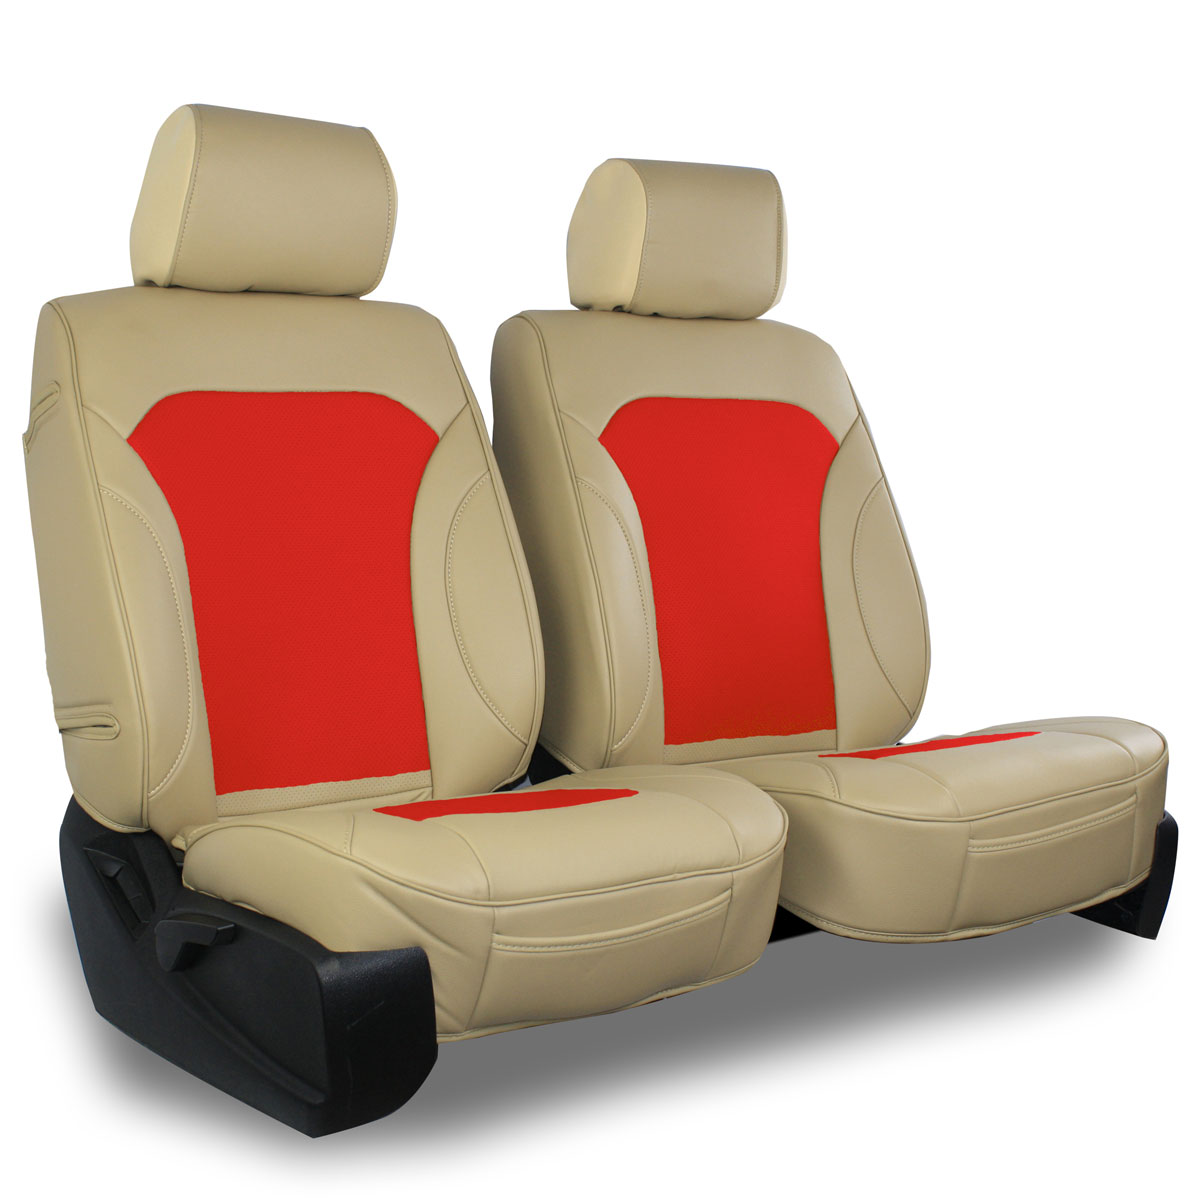 Leatherette Custom Fit Front and Rear Car Seat Covers Compatible